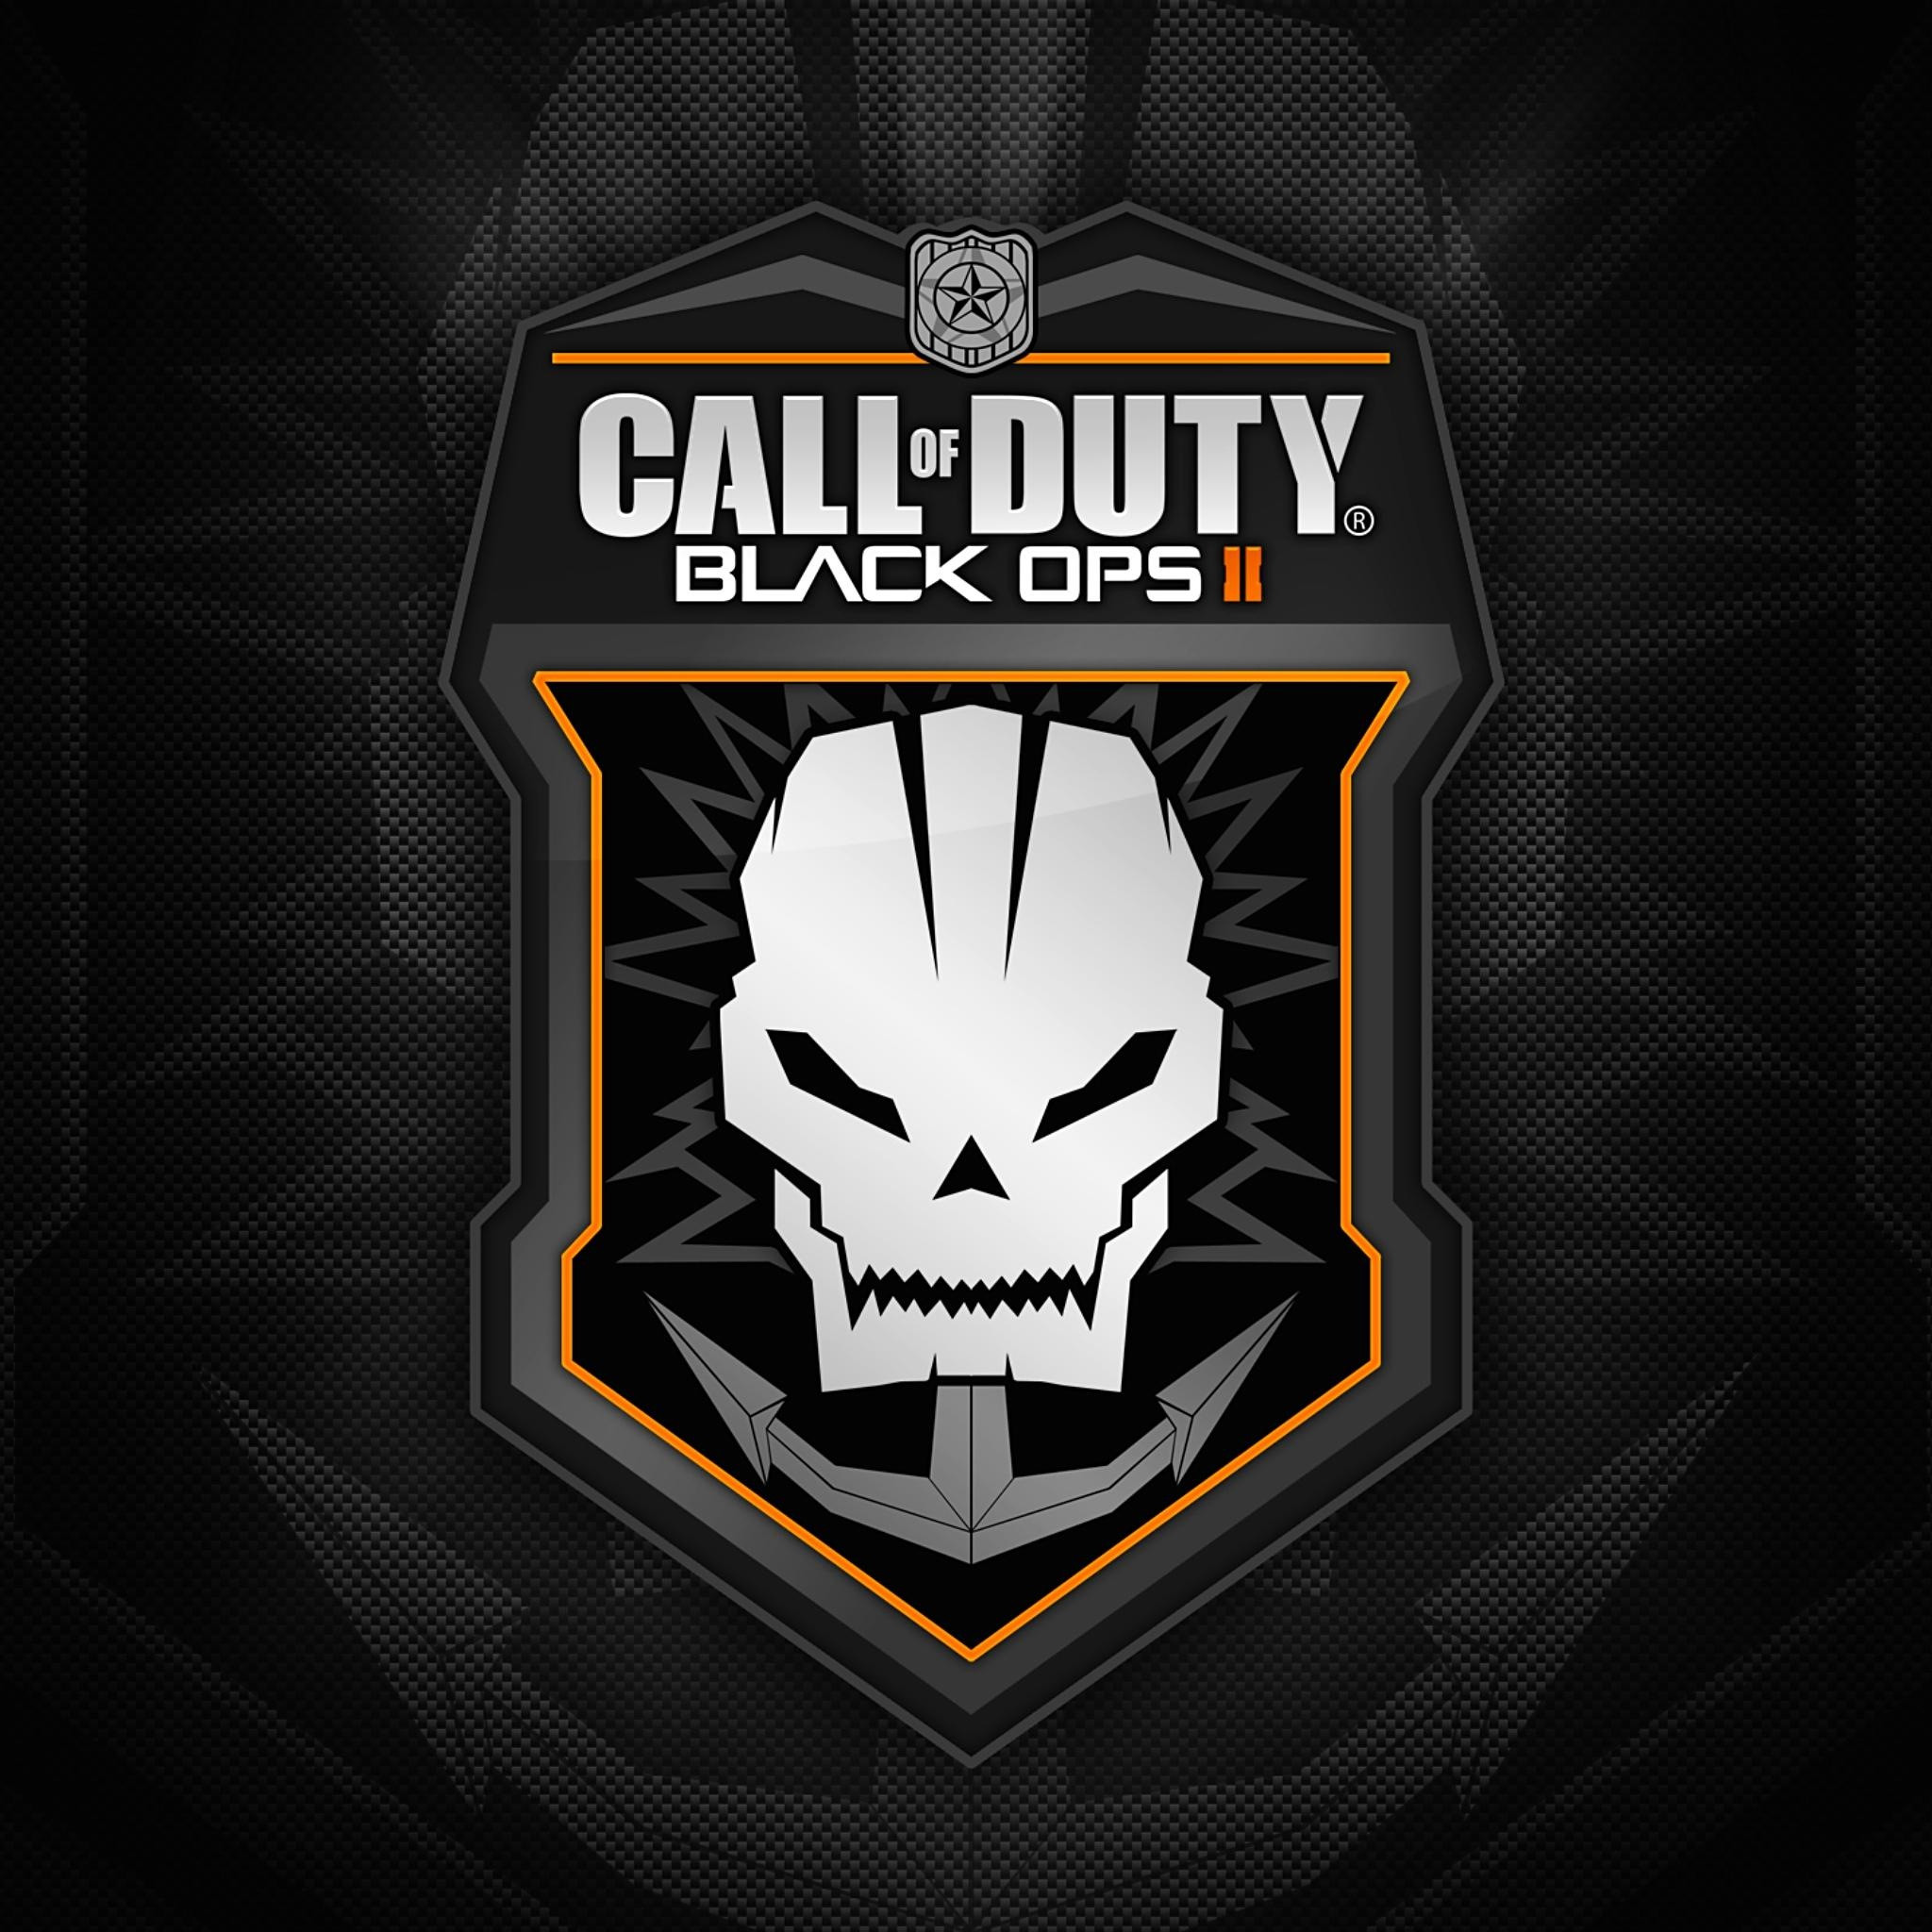 2048x2048 Call of Duty Black Ops 2 Mousepad, x x Polyester with open cell black  rubber backing.